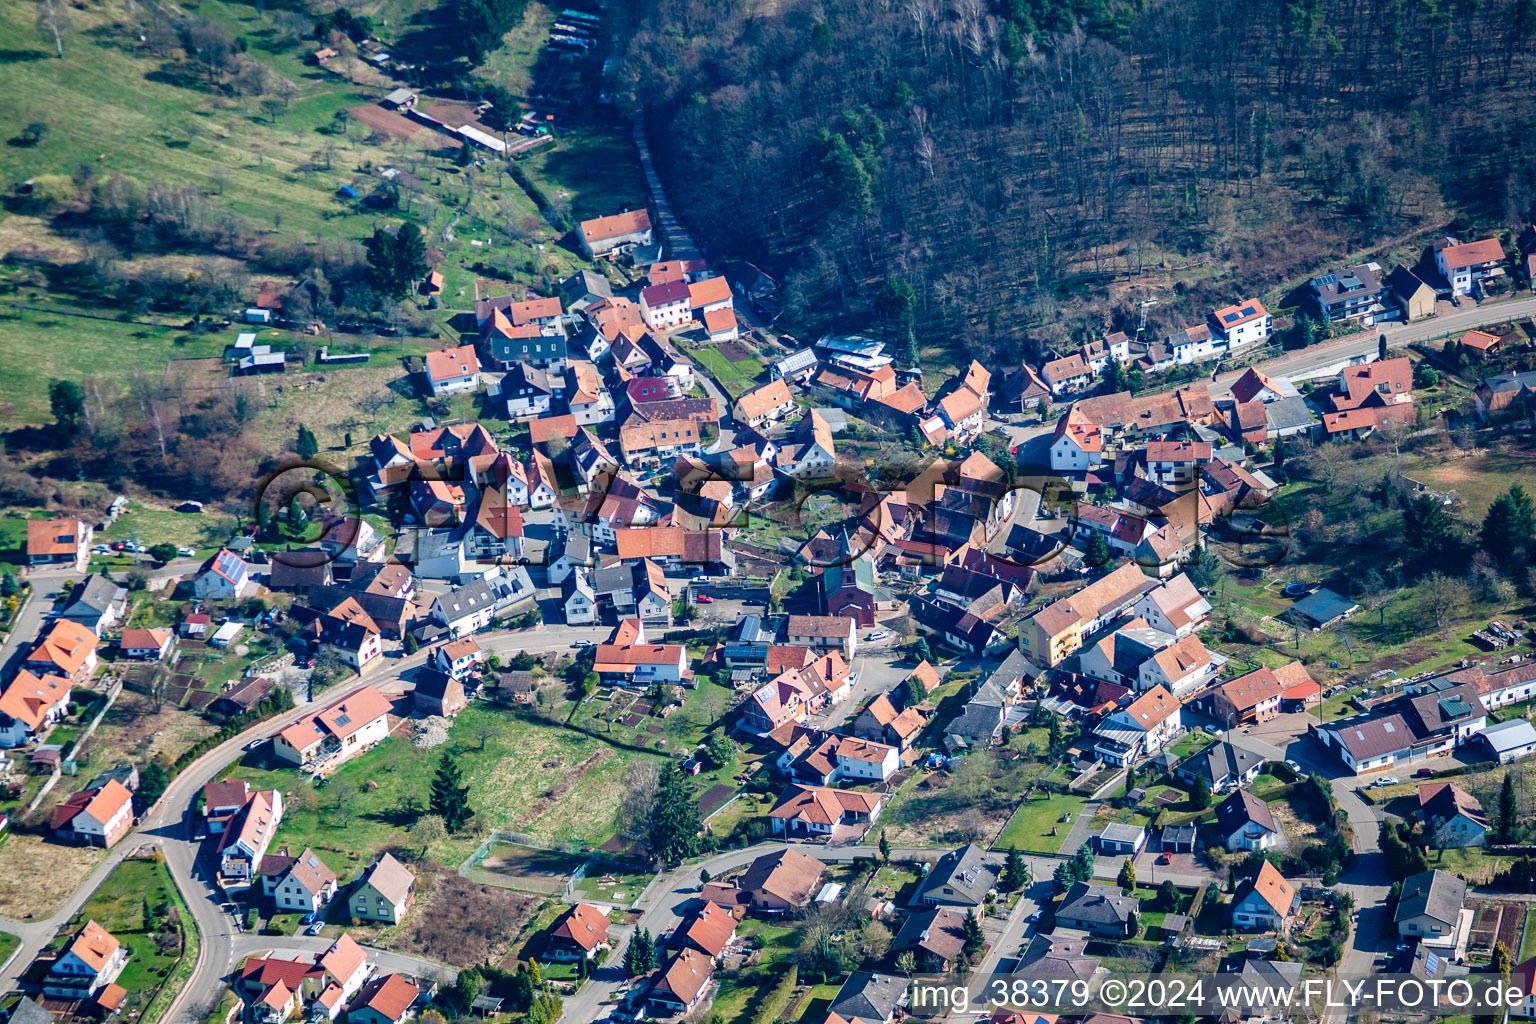 Aerial view of From the southwest in the district Stein in Gossersweiler-Stein in the state Rhineland-Palatinate, Germany